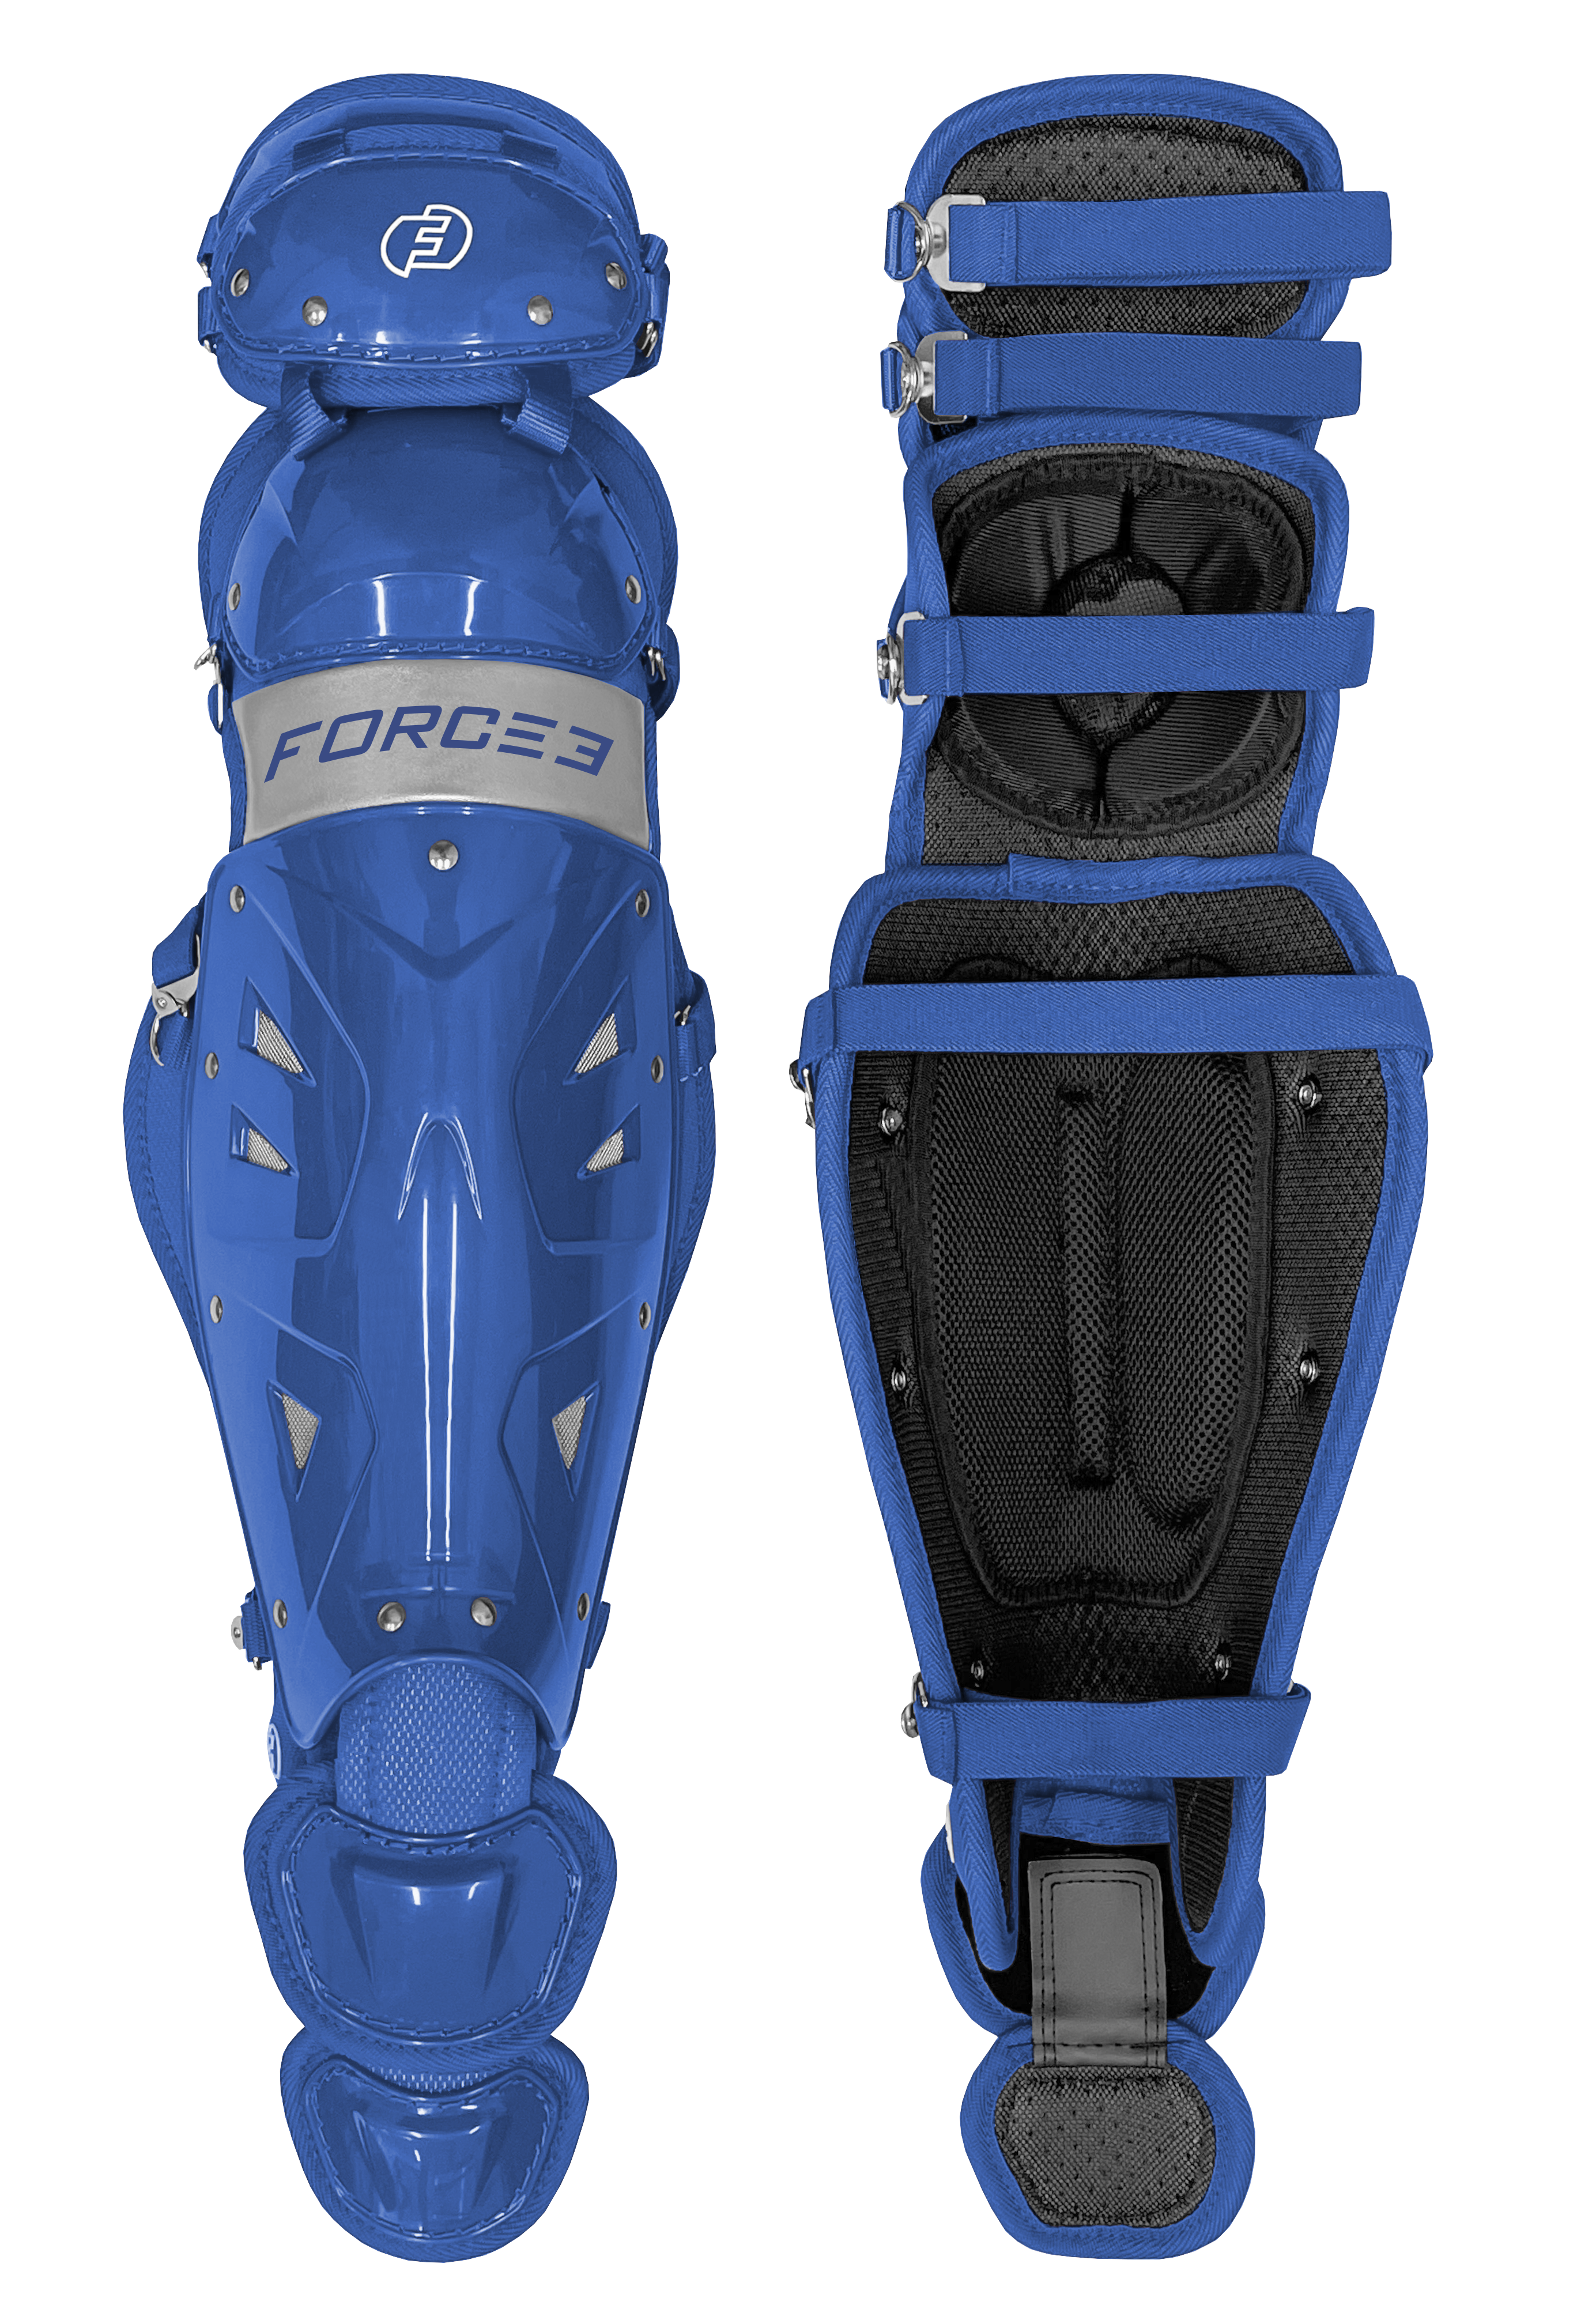 Force3 Intermediate | Pro Gear Catcher Shin Guards with Dupont Kevlar